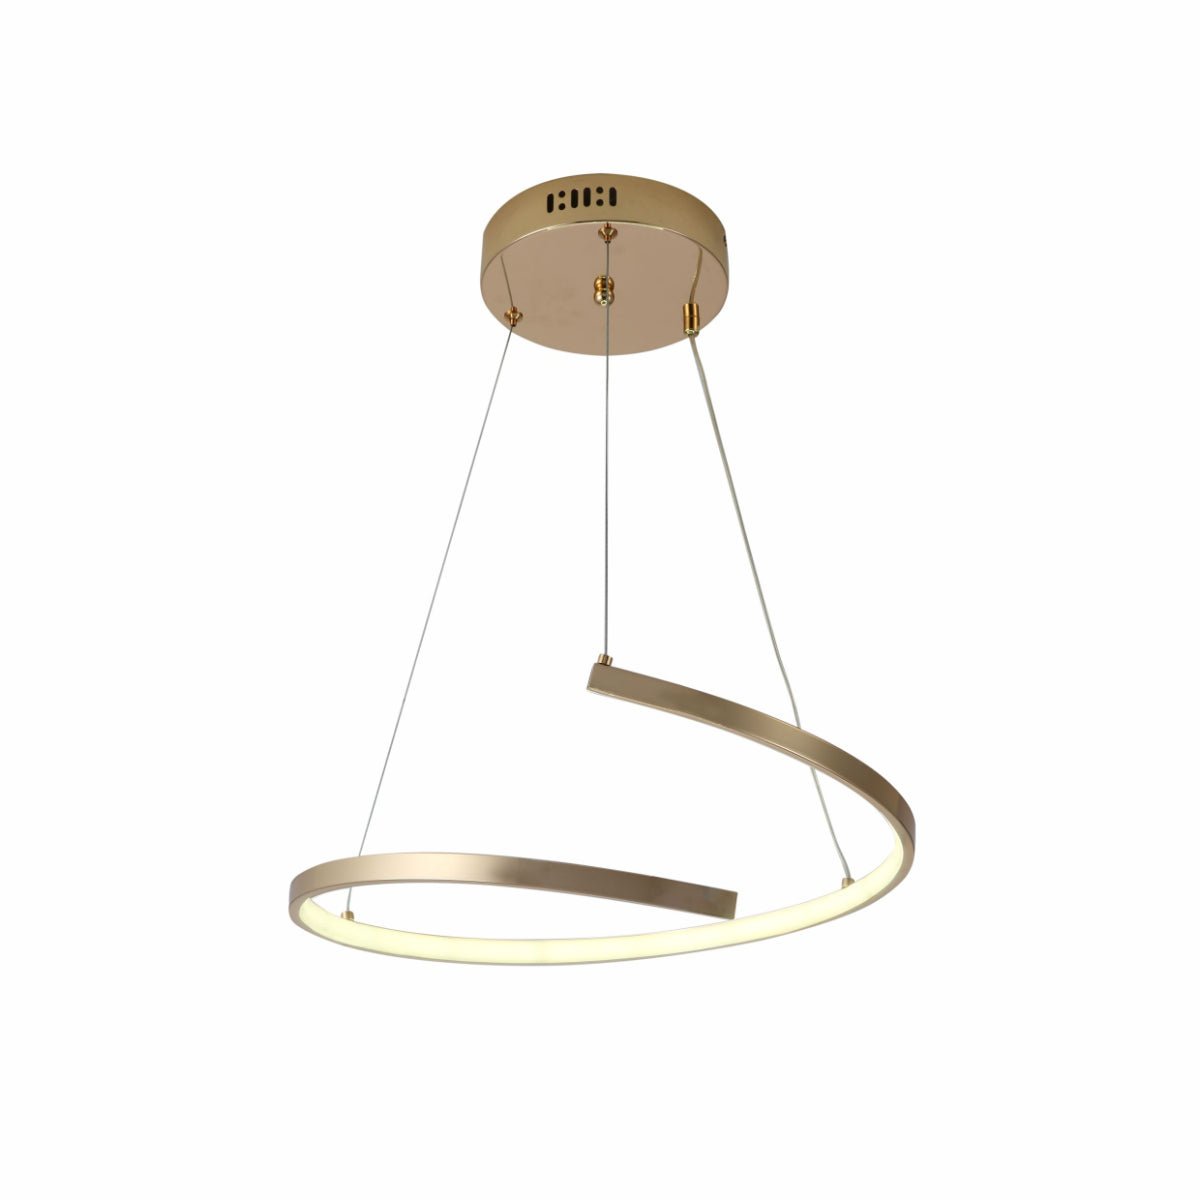 Main image of LED Spiral Gold Finishing 30W CCT Change Dimmable Contemporary Nordic Scandinavian Pendant Ceiling Light with Remote Control | TEKLED 154-17268